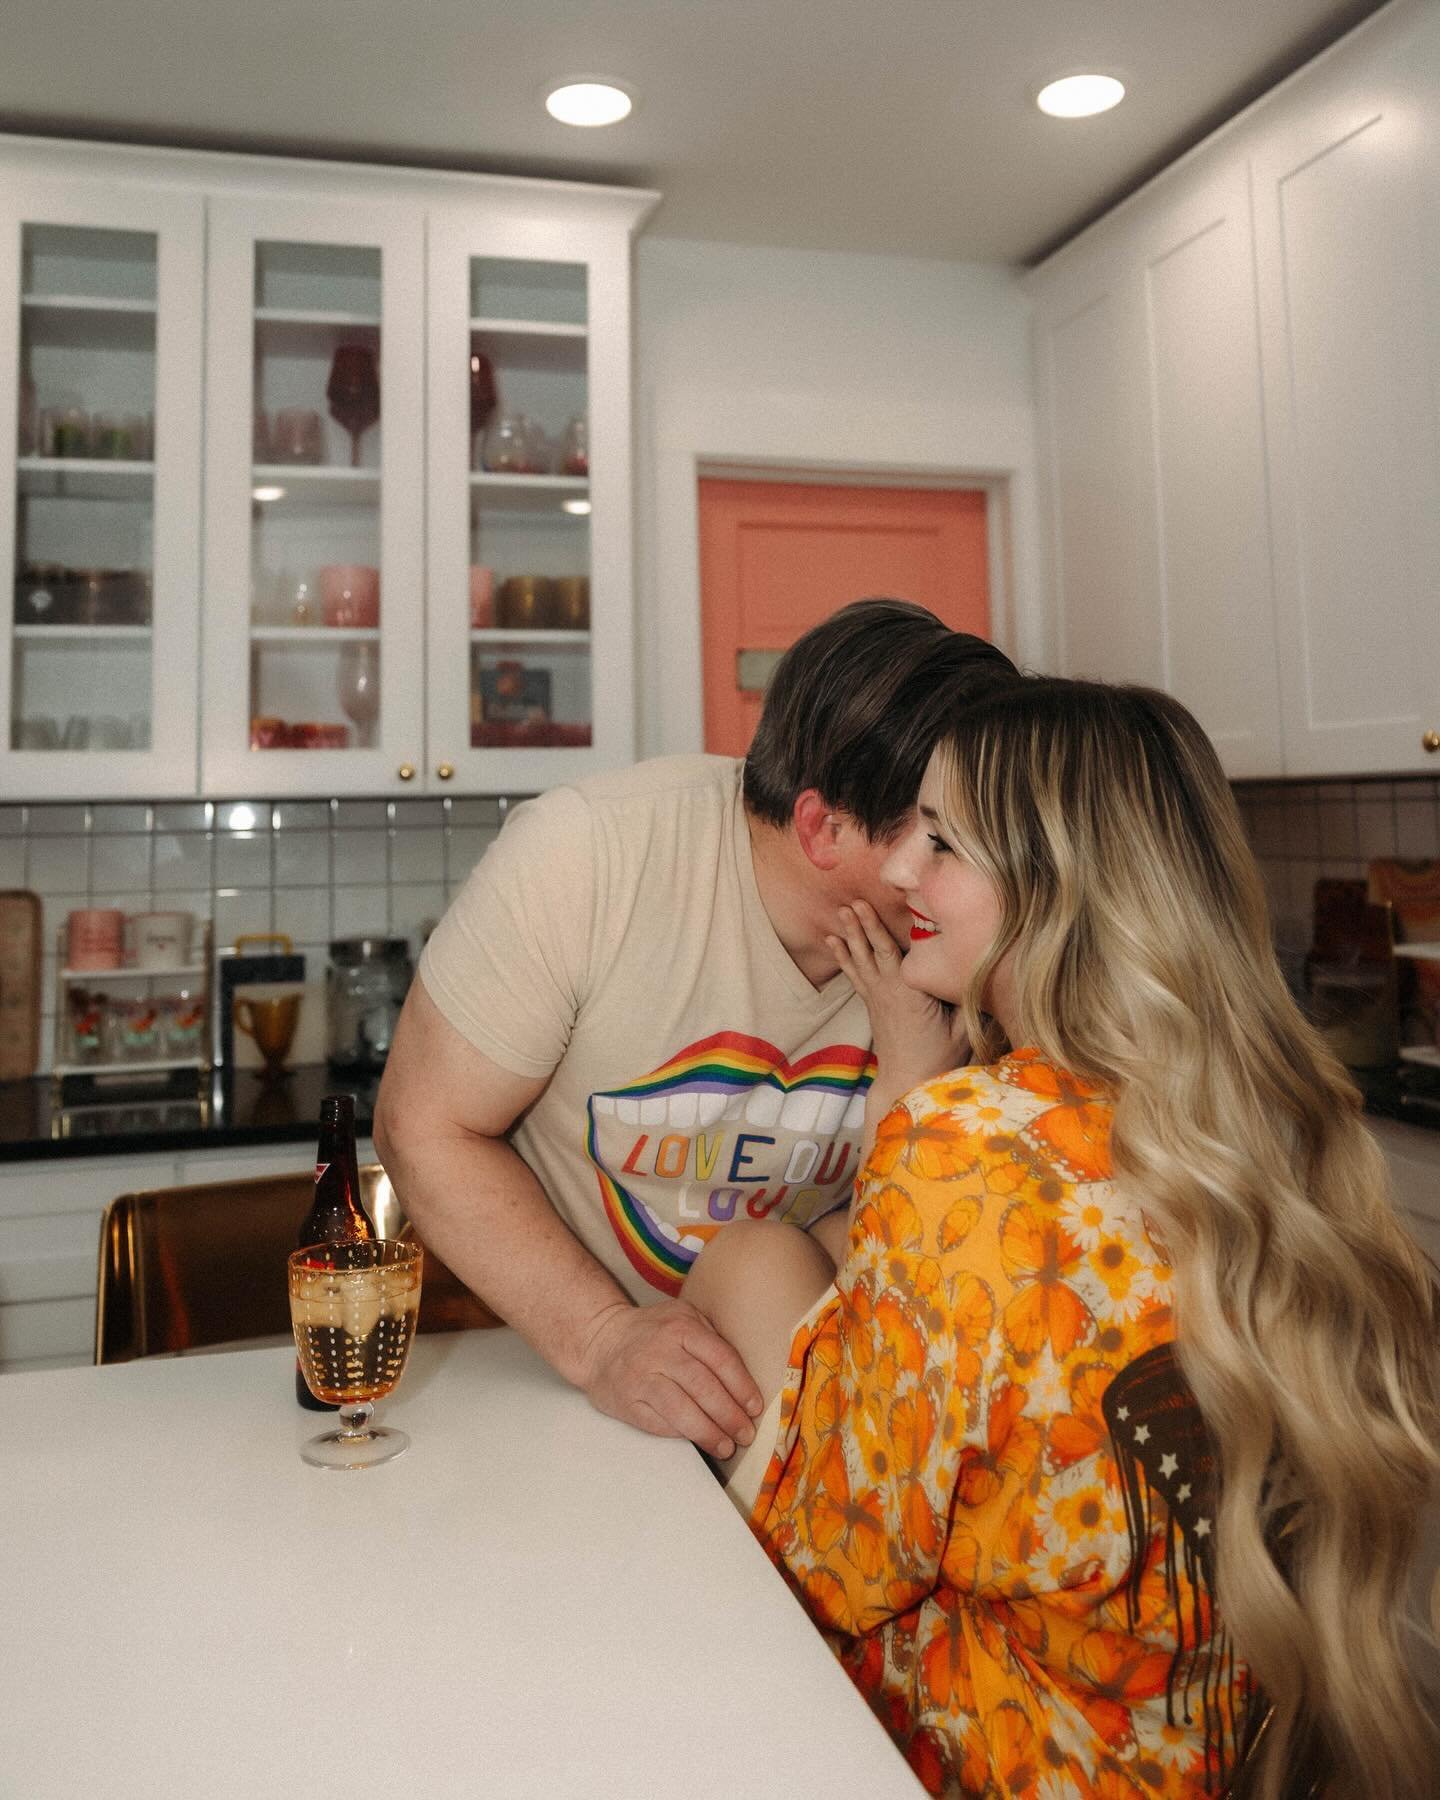 We need more &ldquo;cocktails in the kitchen at midnight&rdquo; date sessions 😍😍
&mdash;
In all seriousness, we don&rsquo;t have to have a big elaborate plan for your session. We don&rsquo;t need crazy outfits or plans, we can literally photograph 